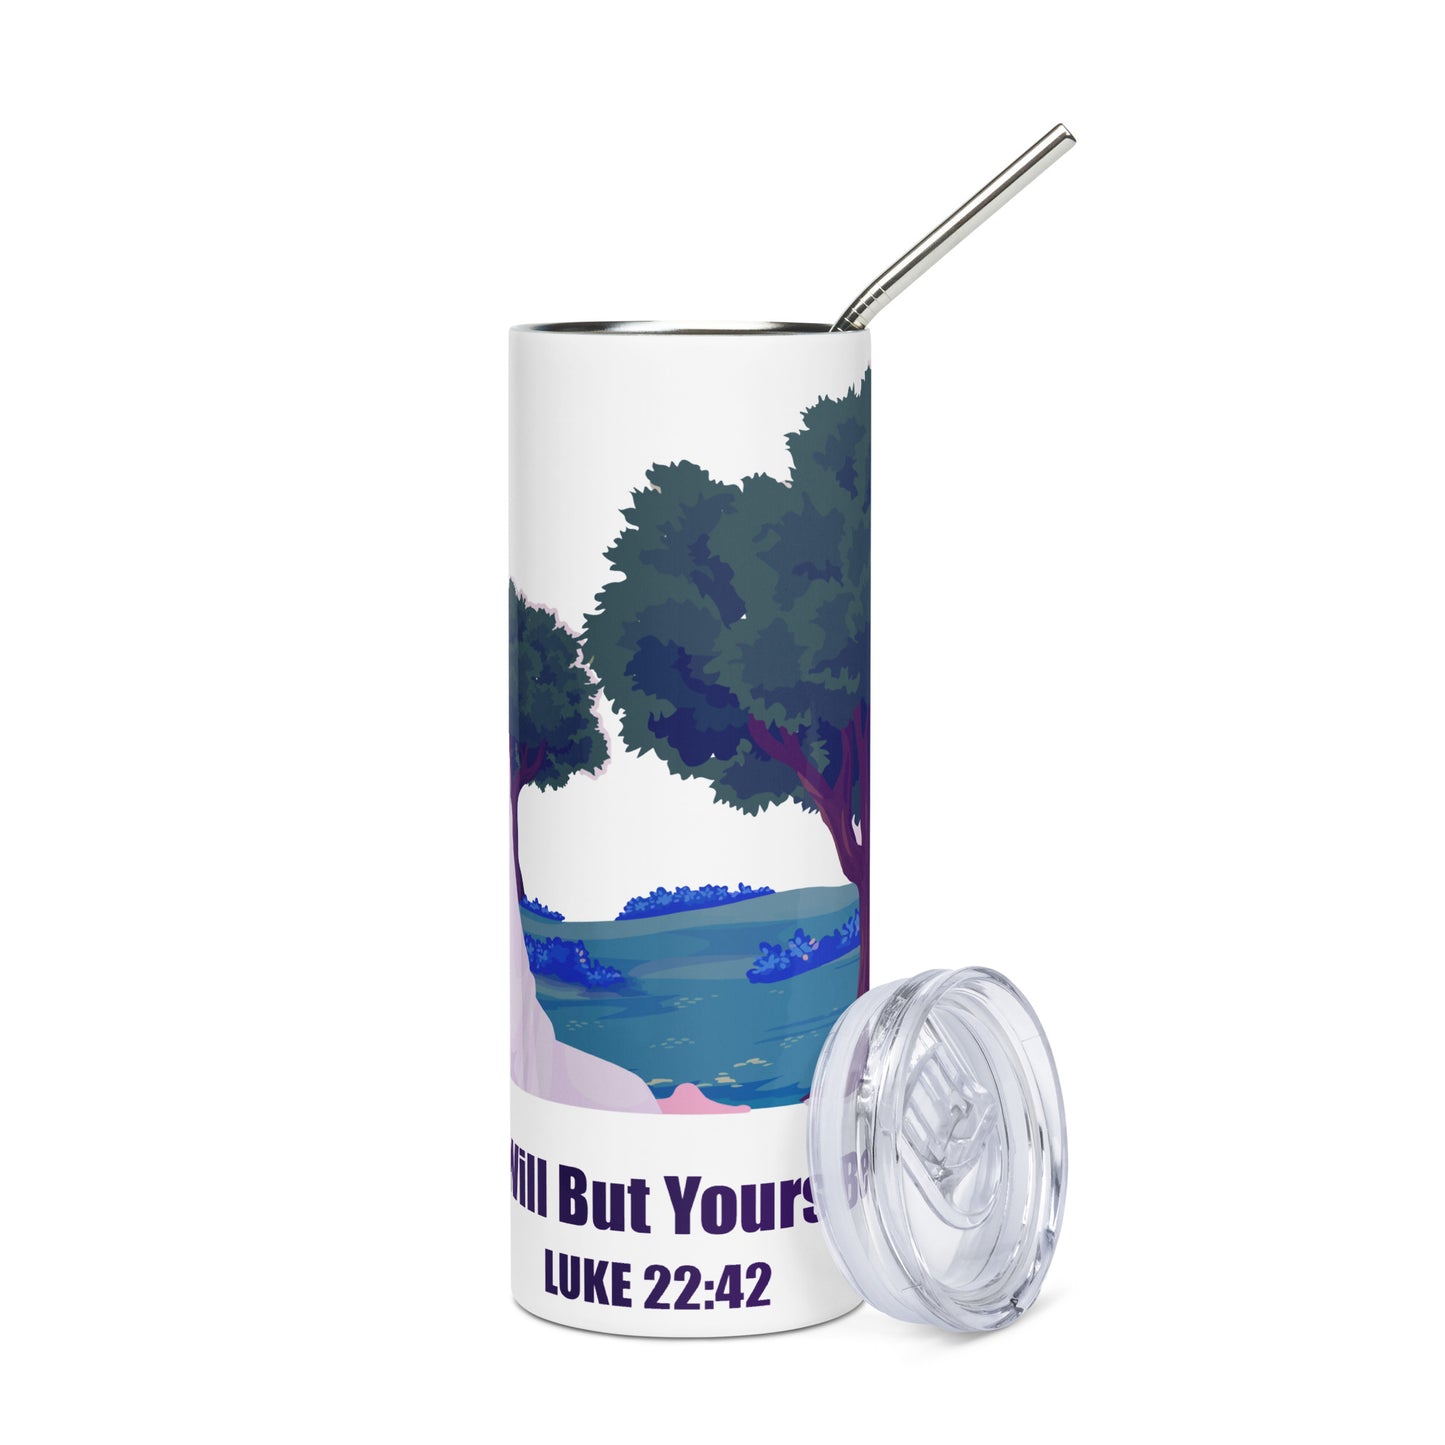 Not Your Will Stainless Steel Tumbler